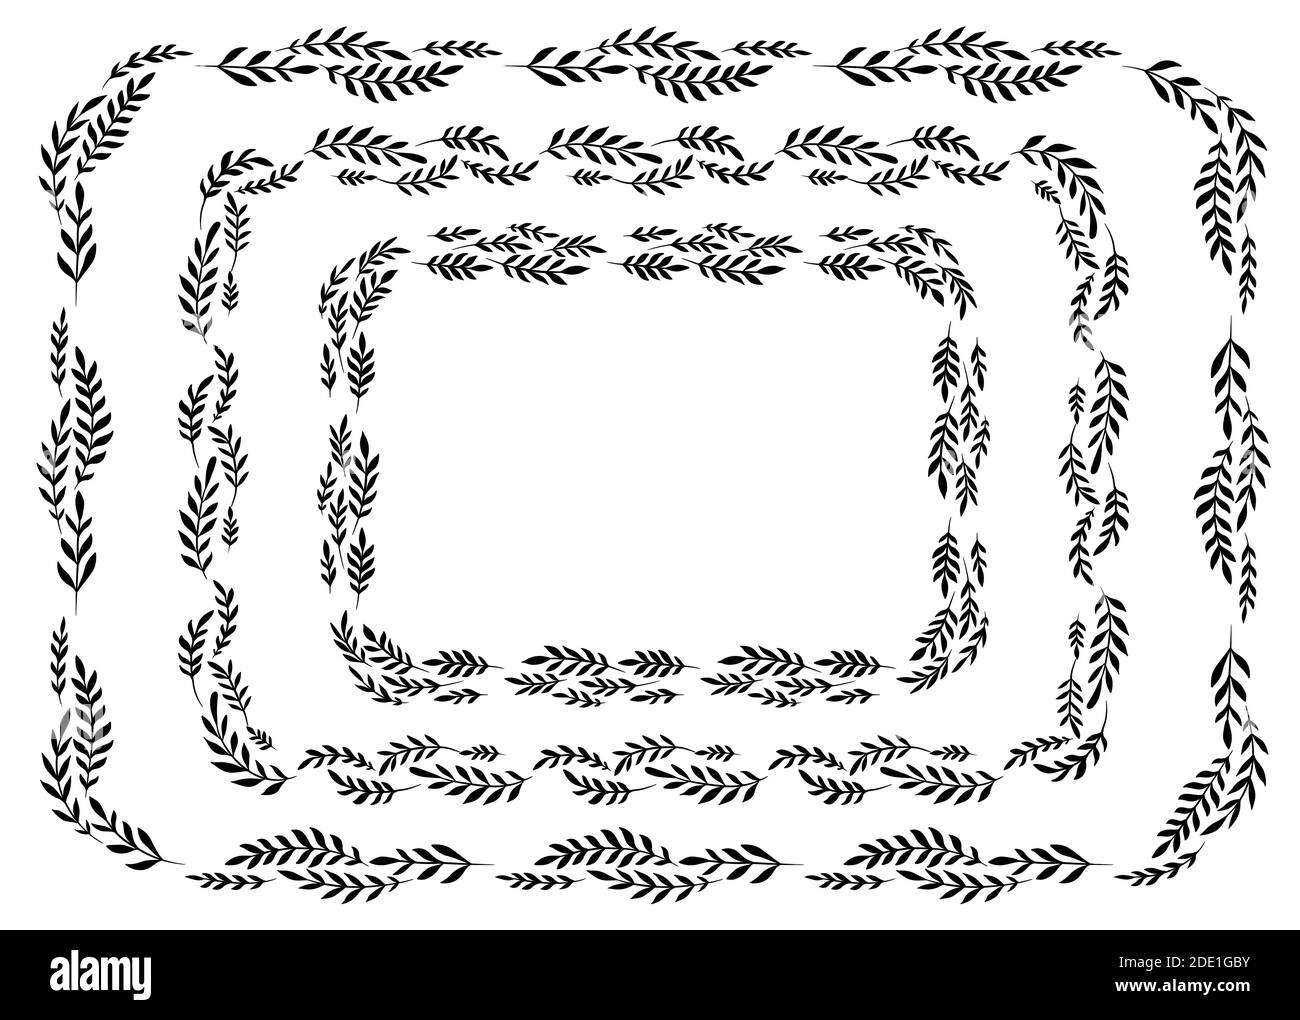 Set of black silhouettes of rectangular laurel frames made of branches and leaves. The object is separate from the background. Natural vector template Stock Vector